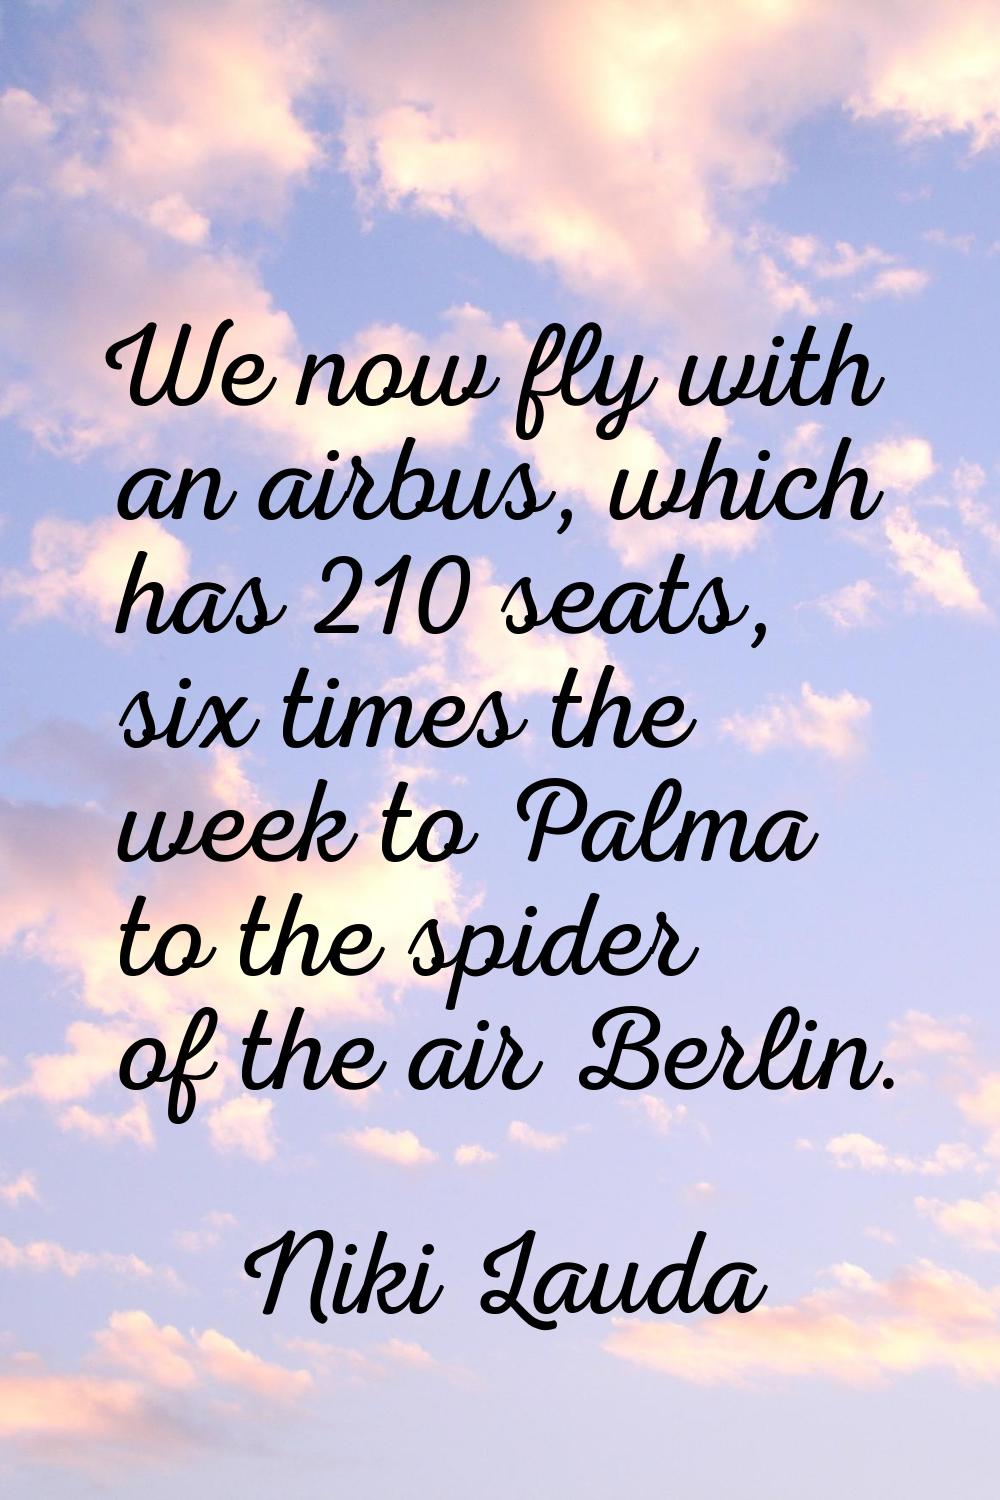 We now fly with an airbus, which has 210 seats, six times the week to Palma to the spider of the ai